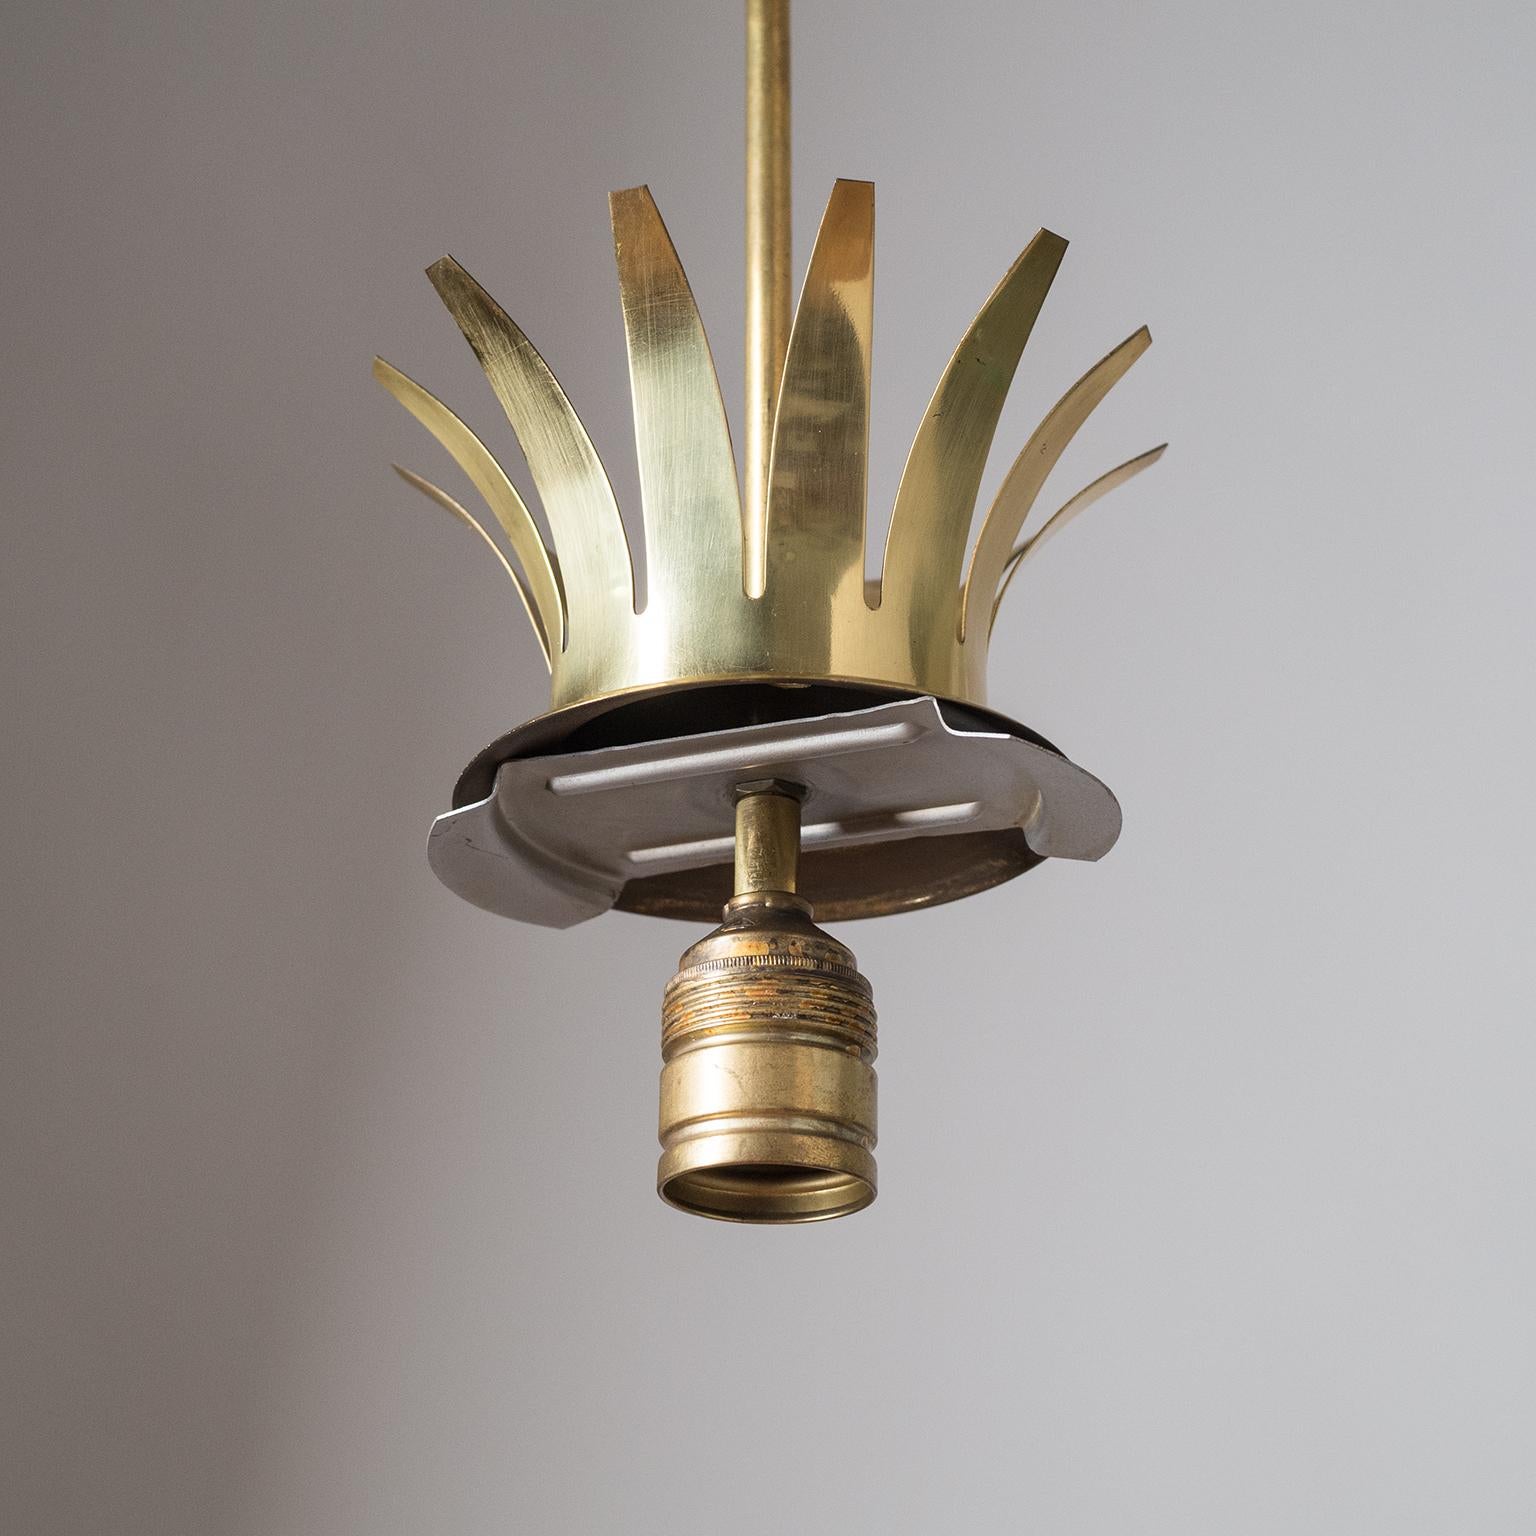 Mid-20th Century Large Austrian Pendant, 1950s, Brass and Satin Glass